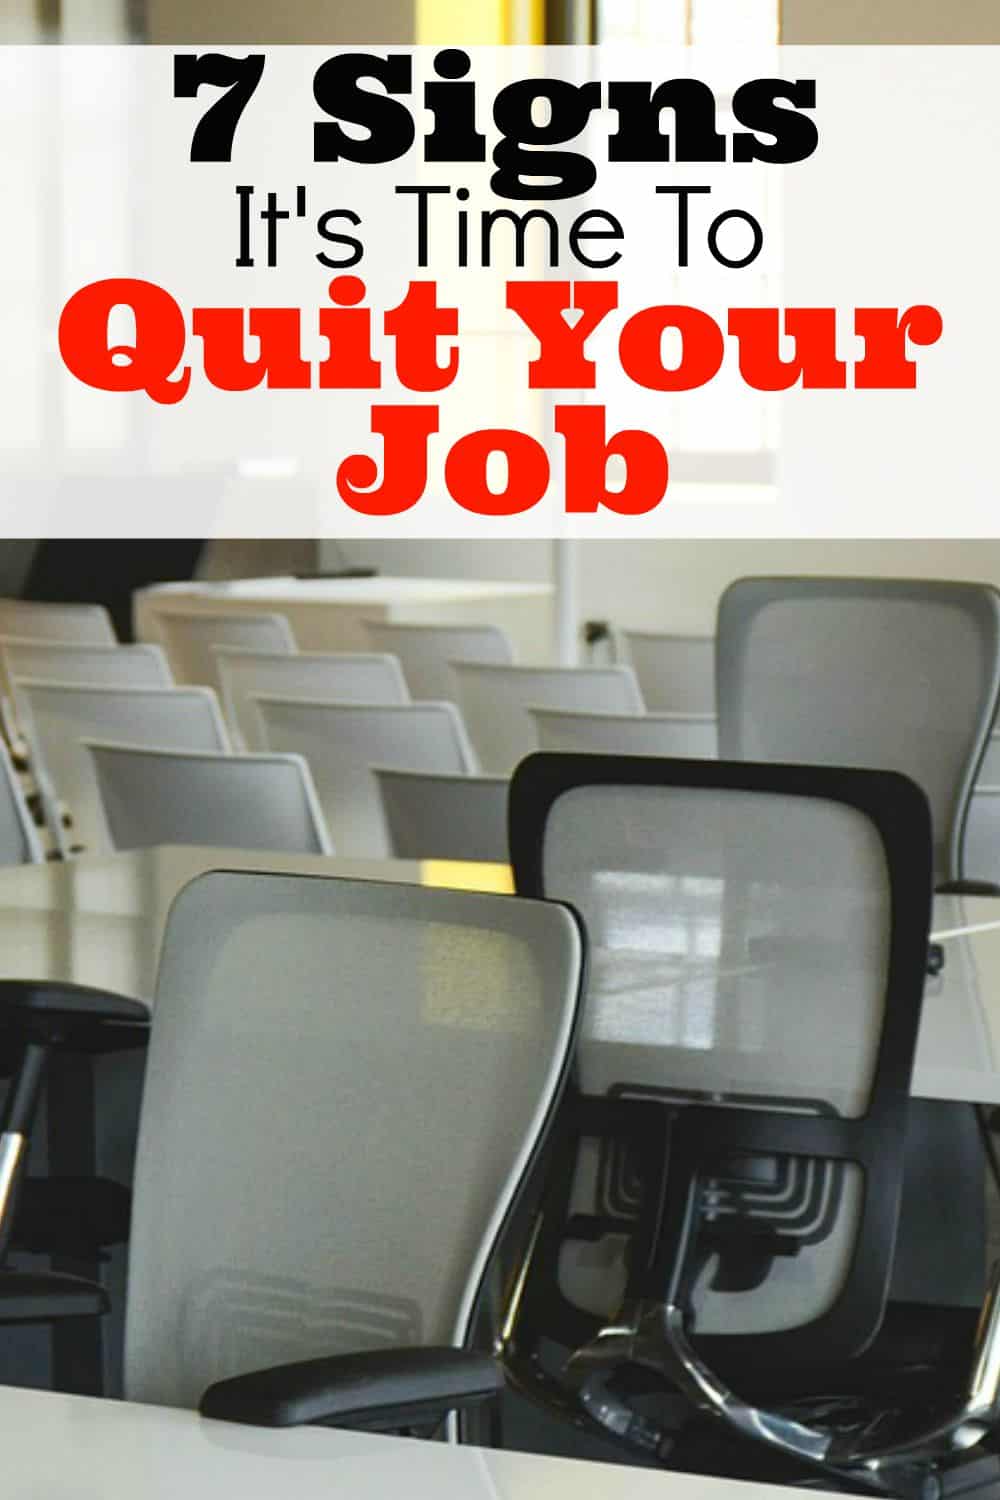 Are you contemplating freelancing? Here are 7 signs it's time to quit your job and make it on your own.